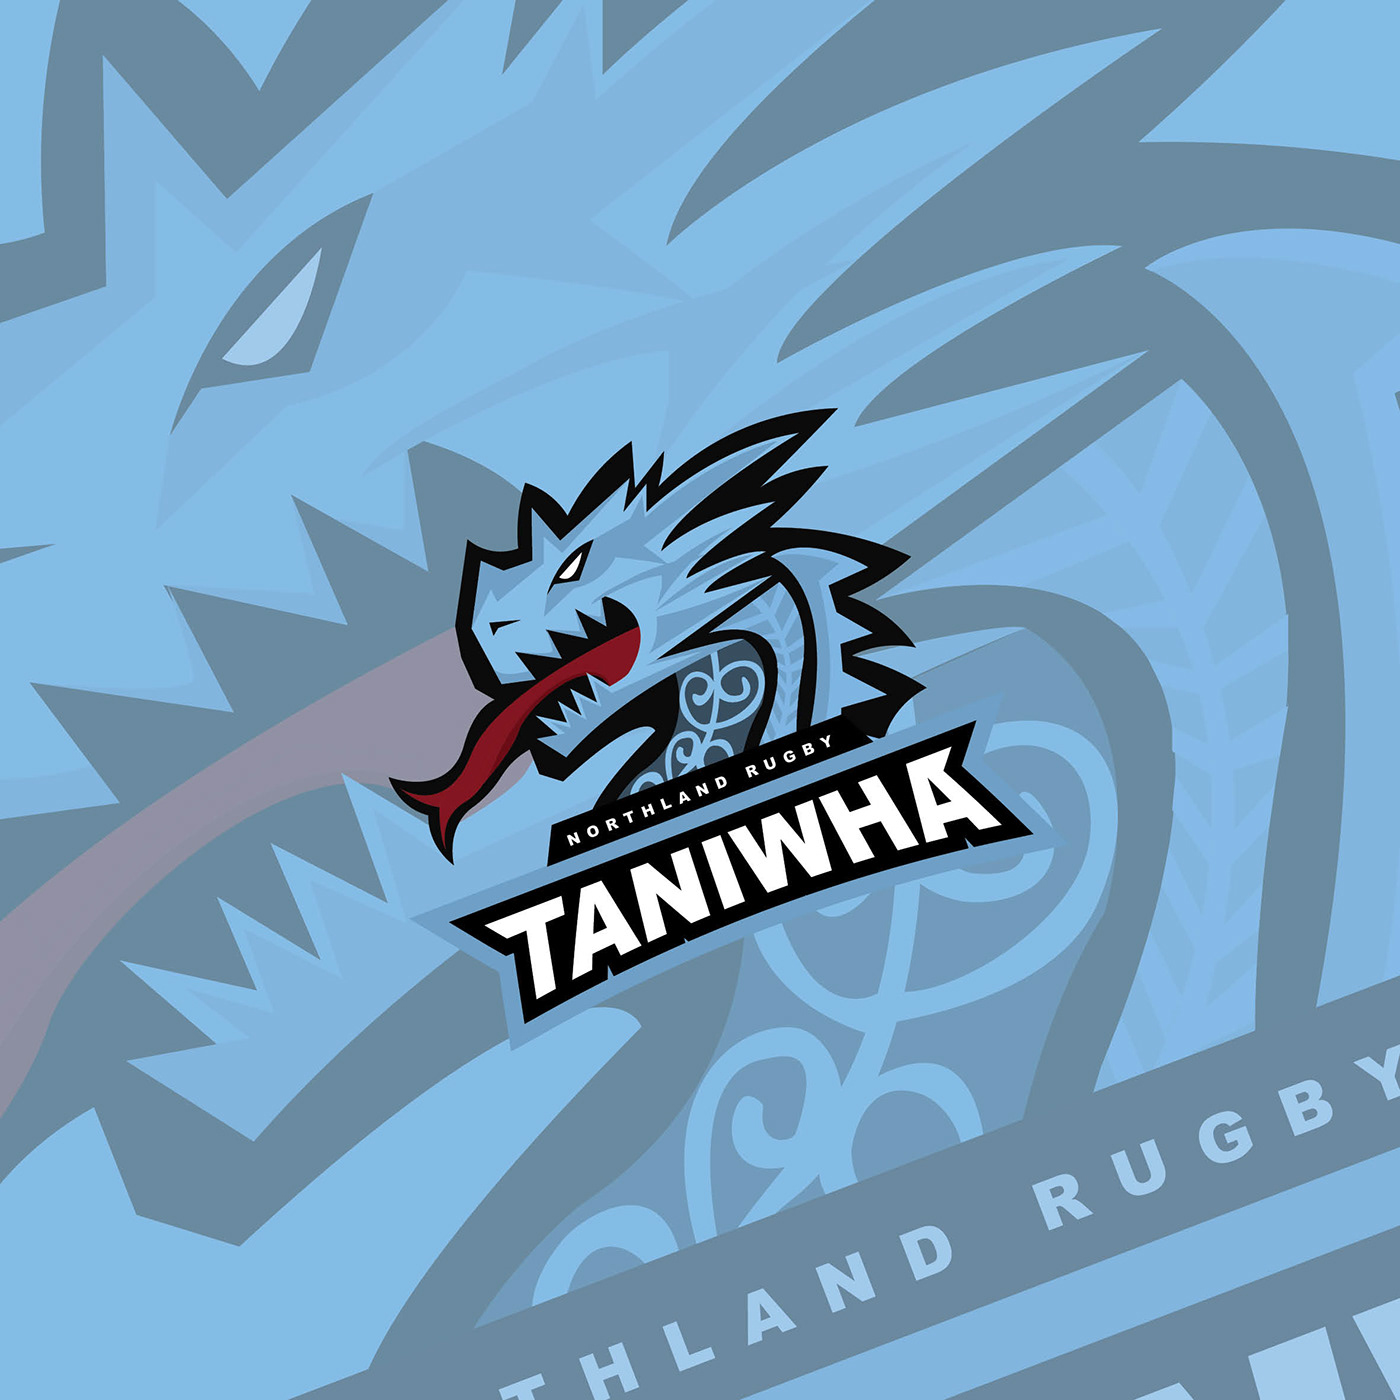 New Zealand northland Rugby rugby nz superrugby Taniwha YOOBEE